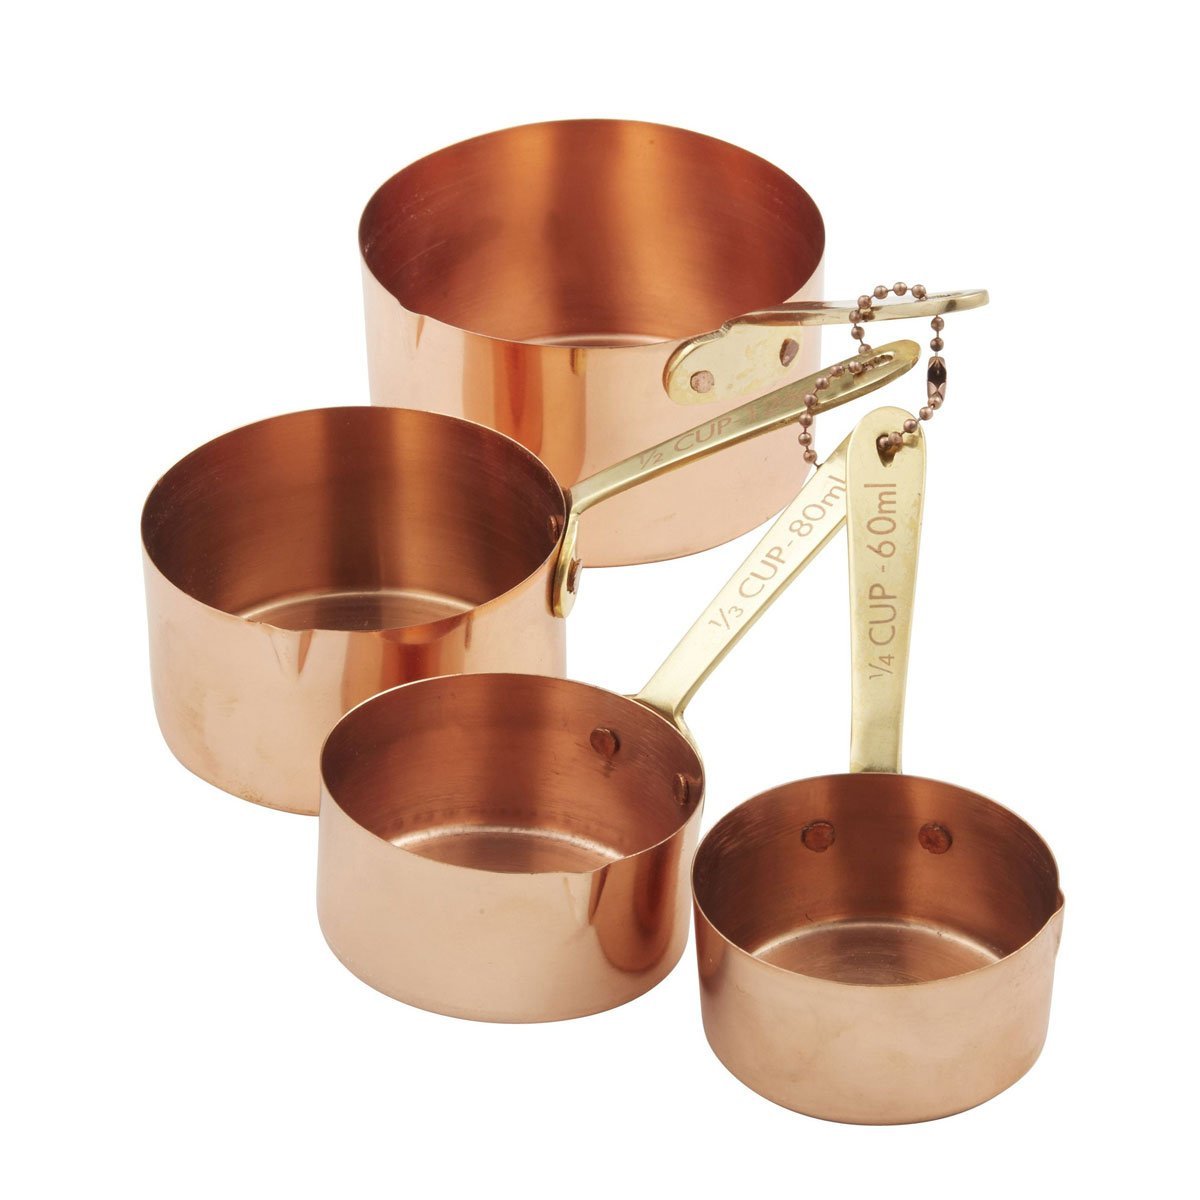 Academy Copper Measuring Cups